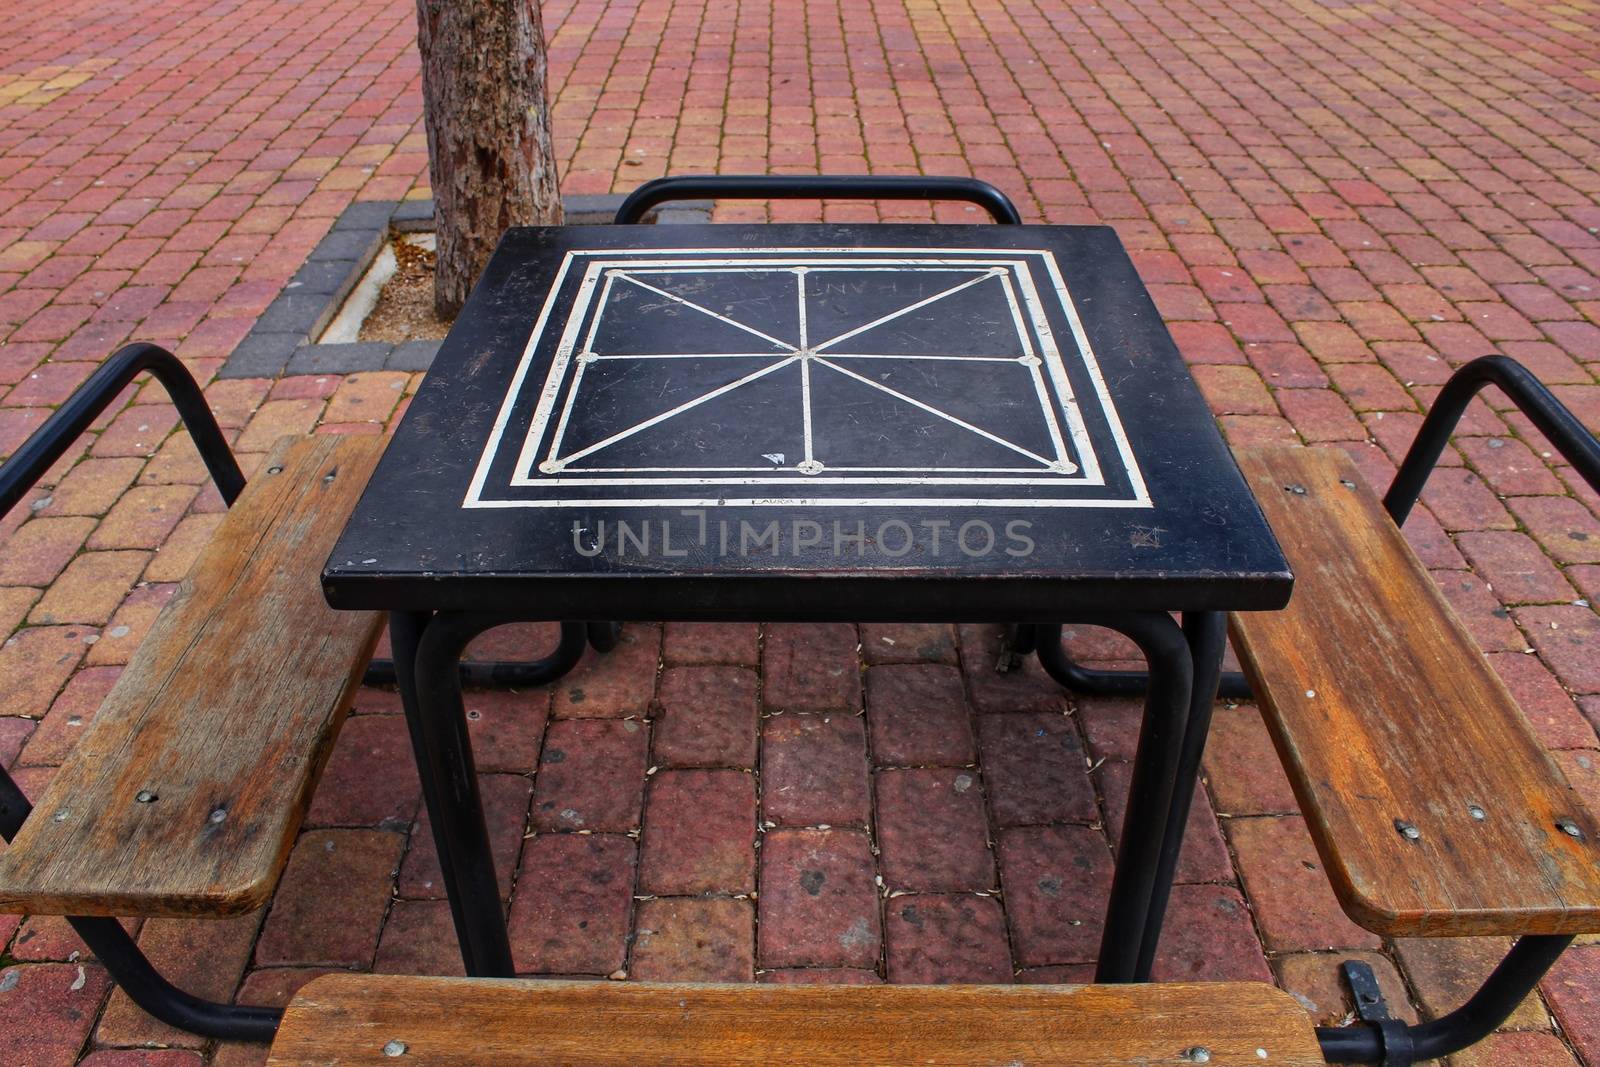 Board games on the street on wooden table and chairs